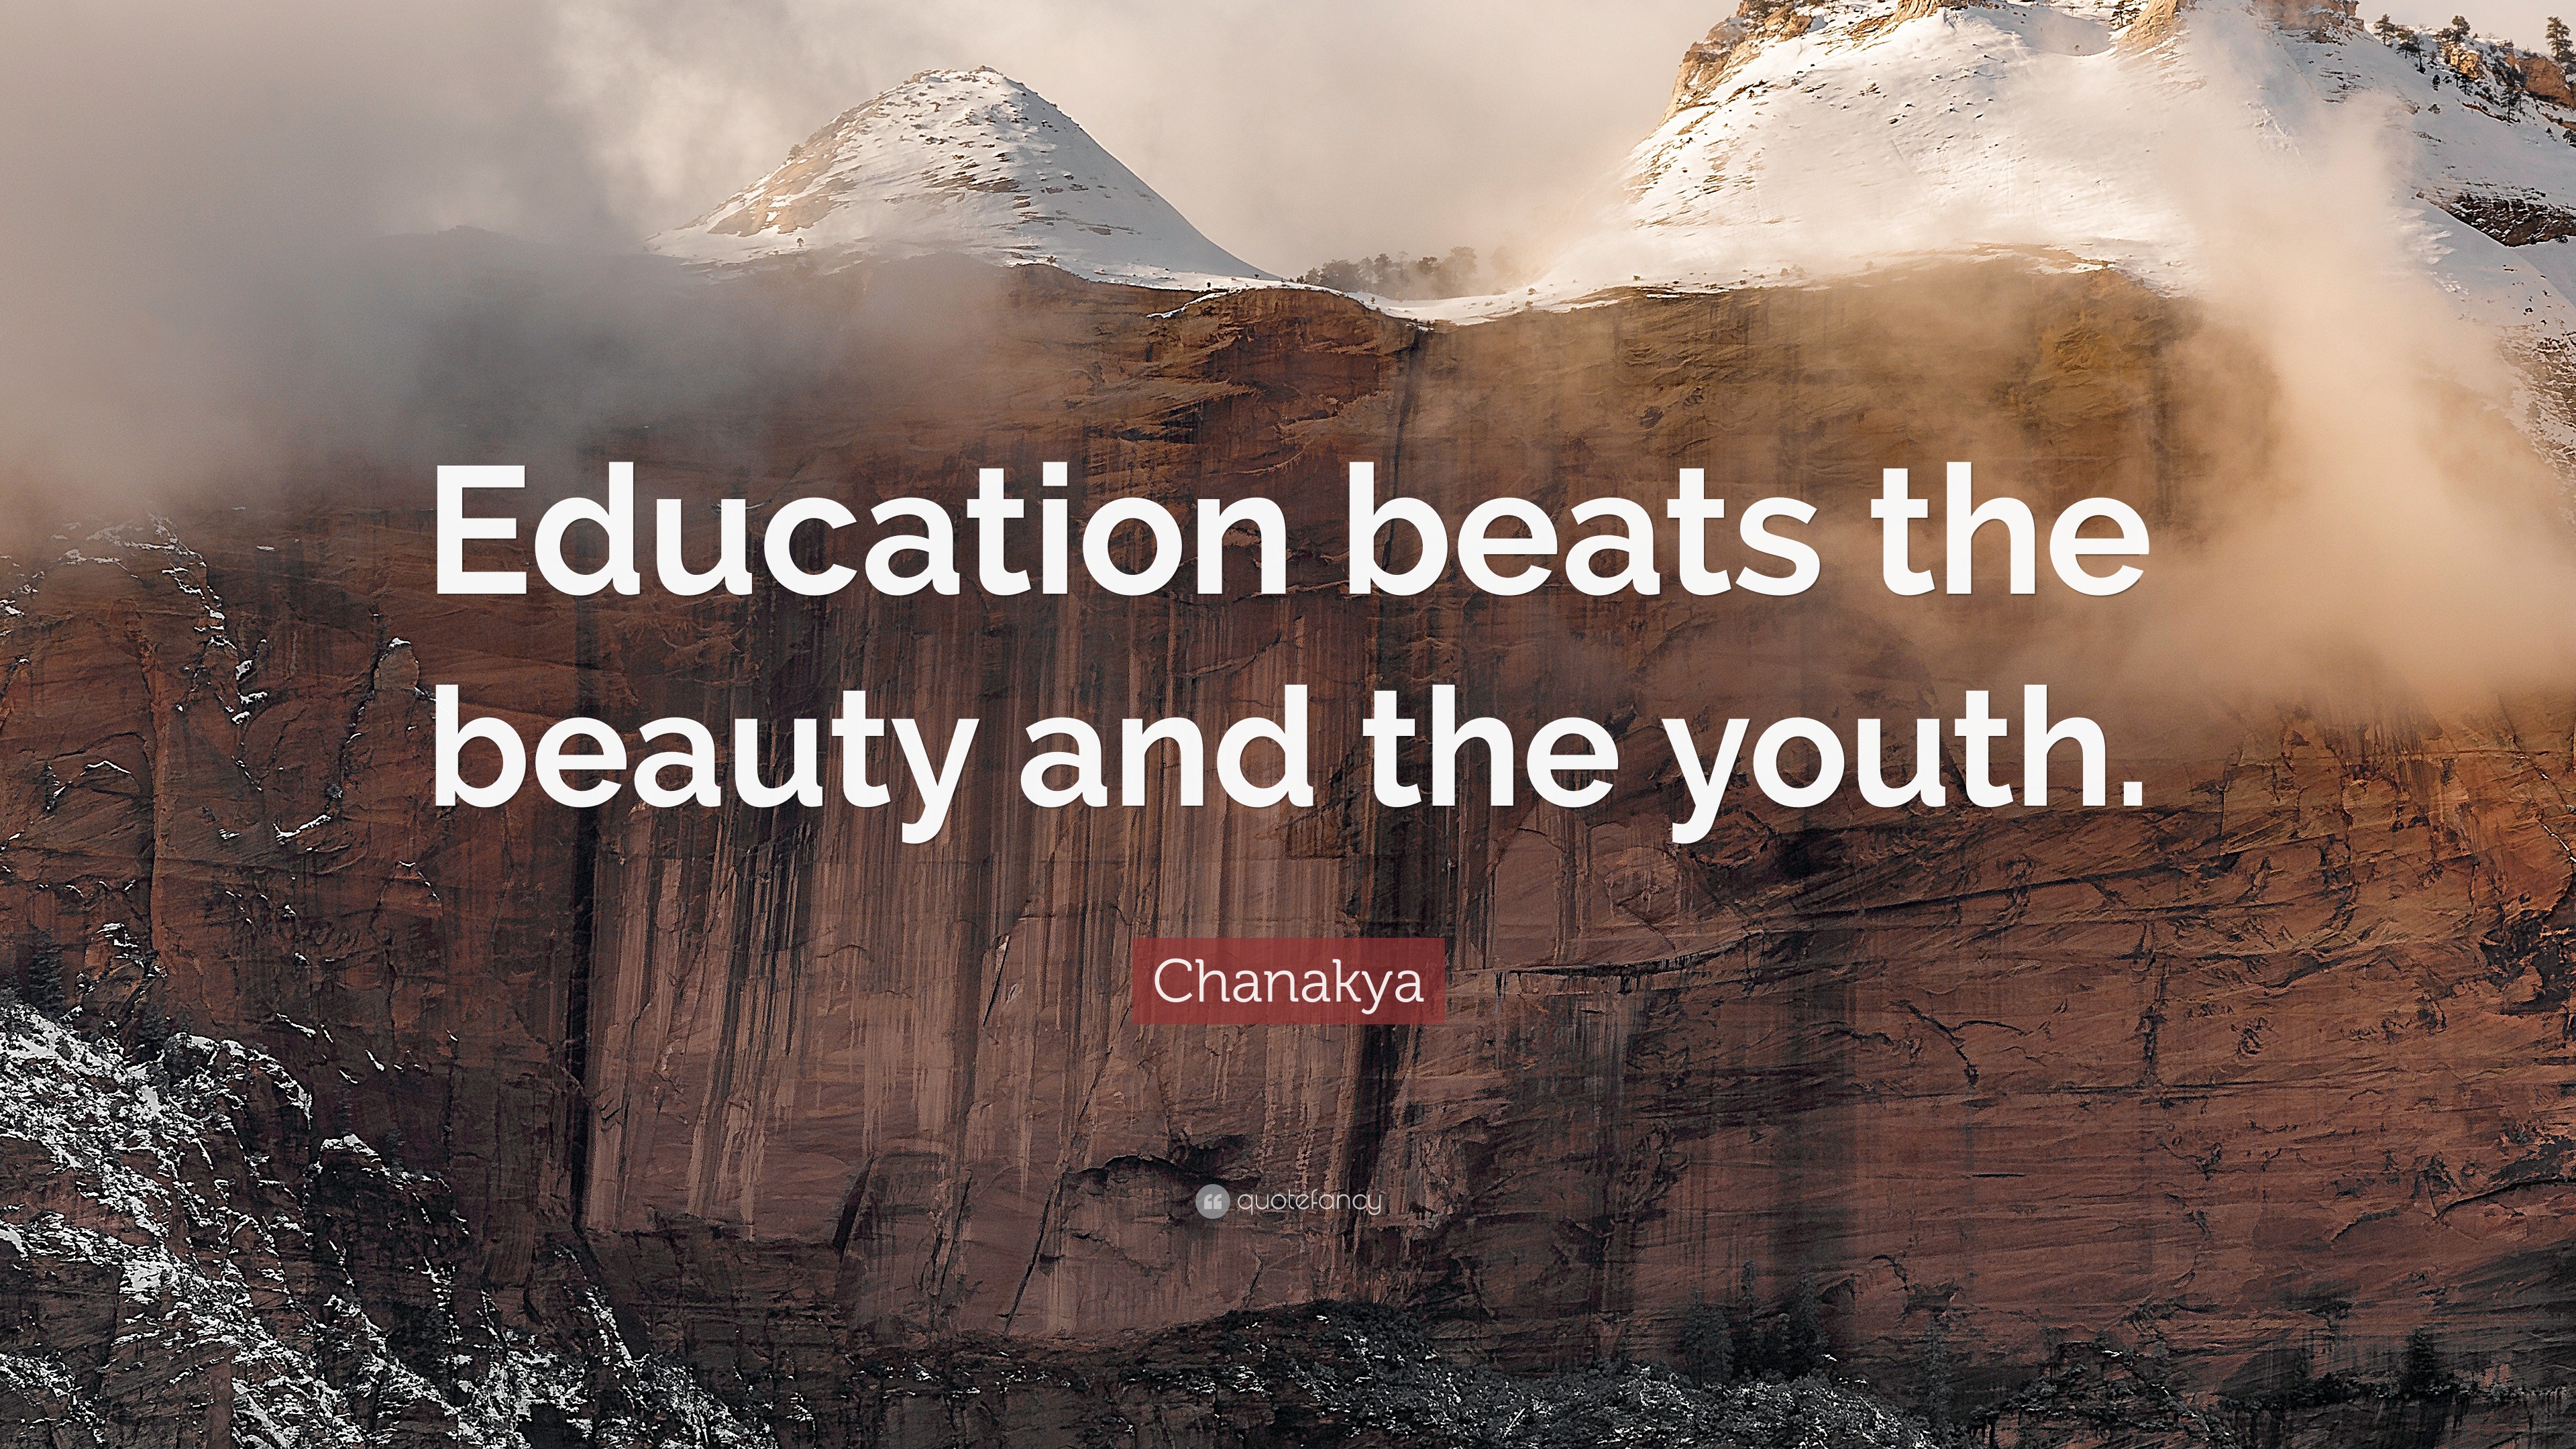 Chanakya Quote: “Education beats the beauty and the youth.”